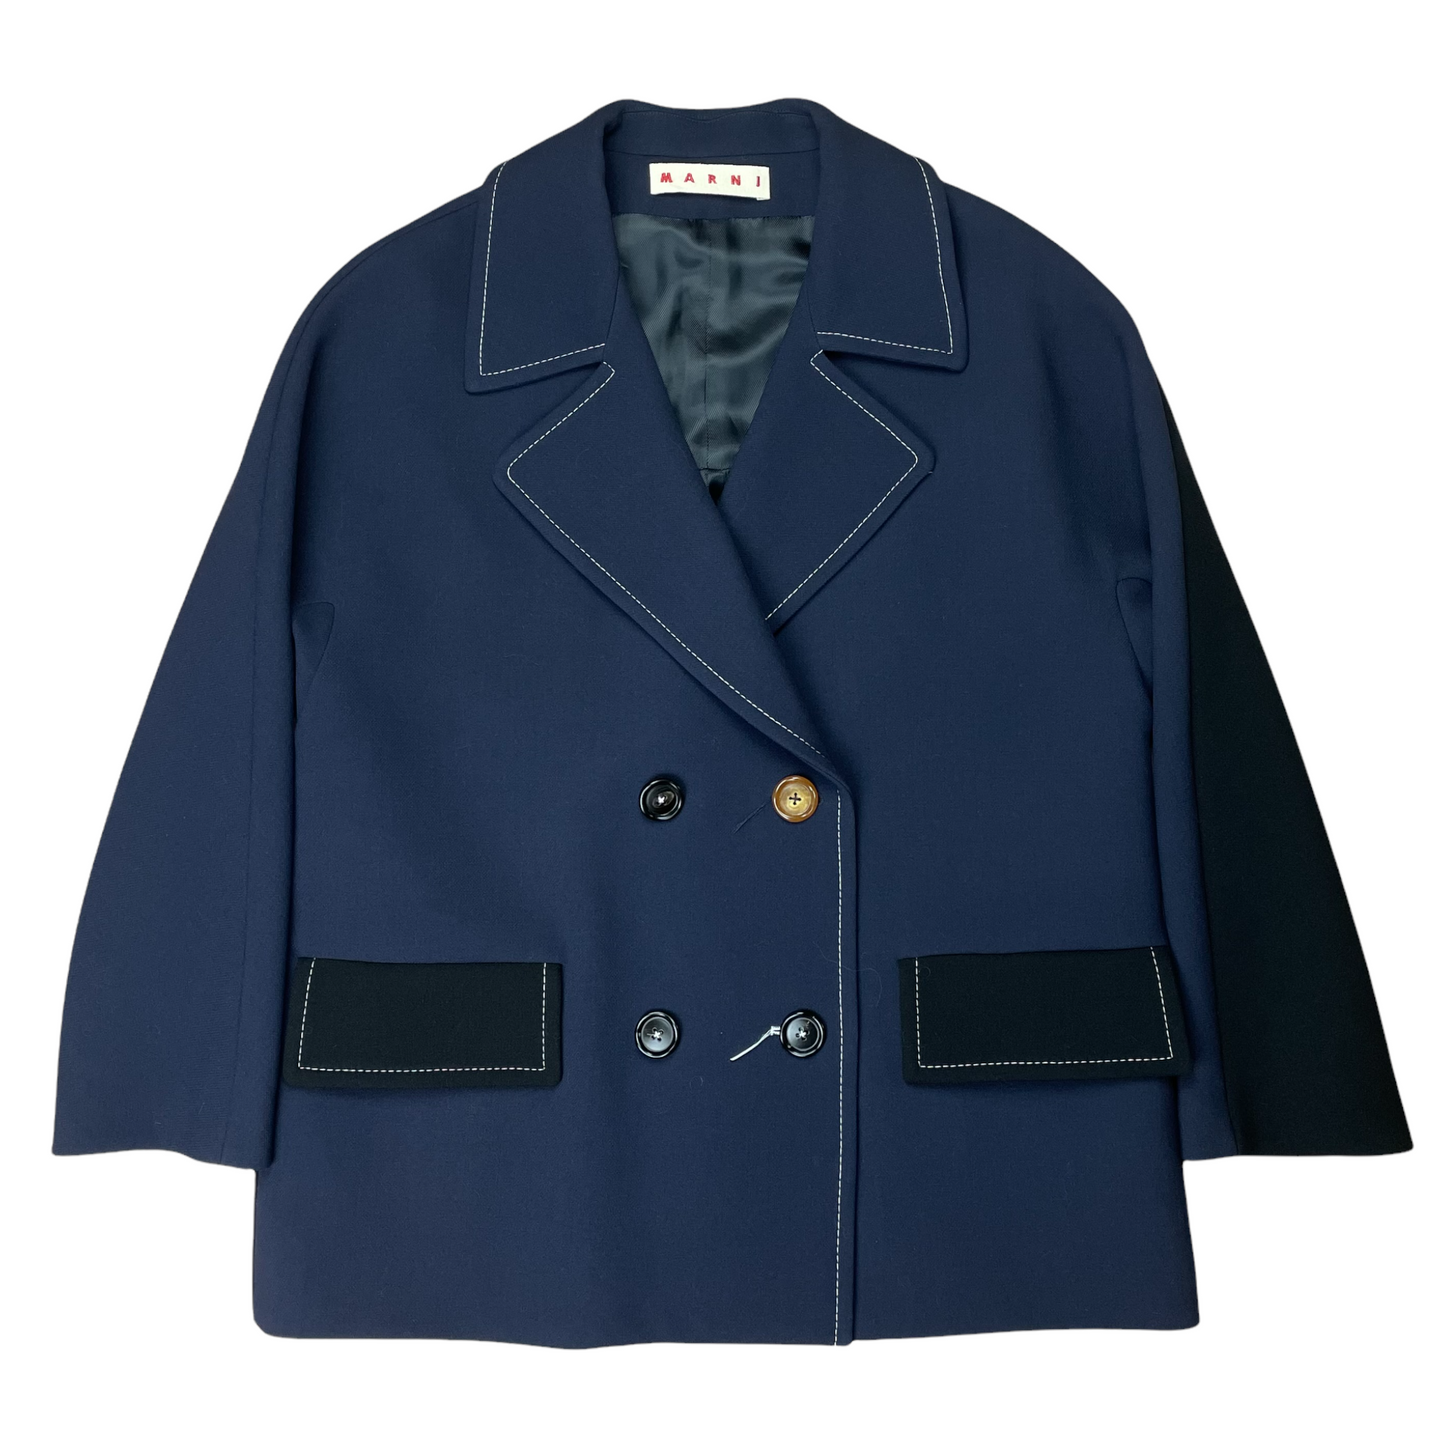 Marni Double Breasted Contrast Jacket - AW18